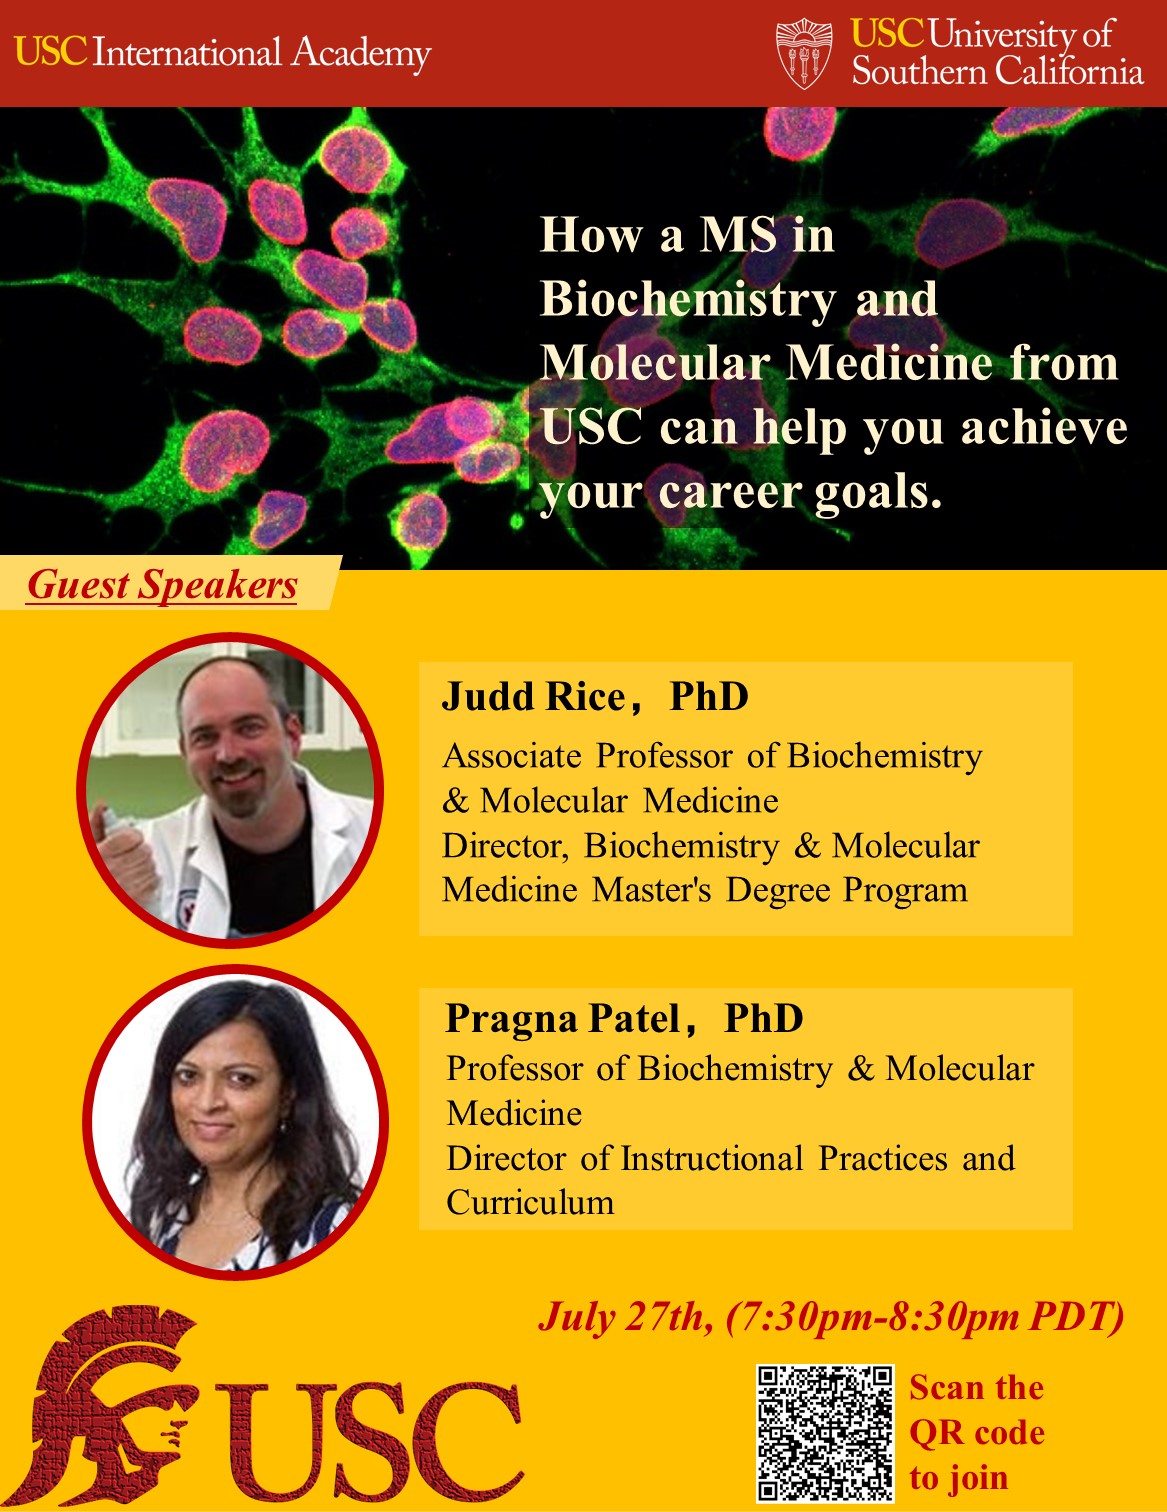 How a MS in Biochemistry and Molecular Medicine from USC can help you achieve your career goals